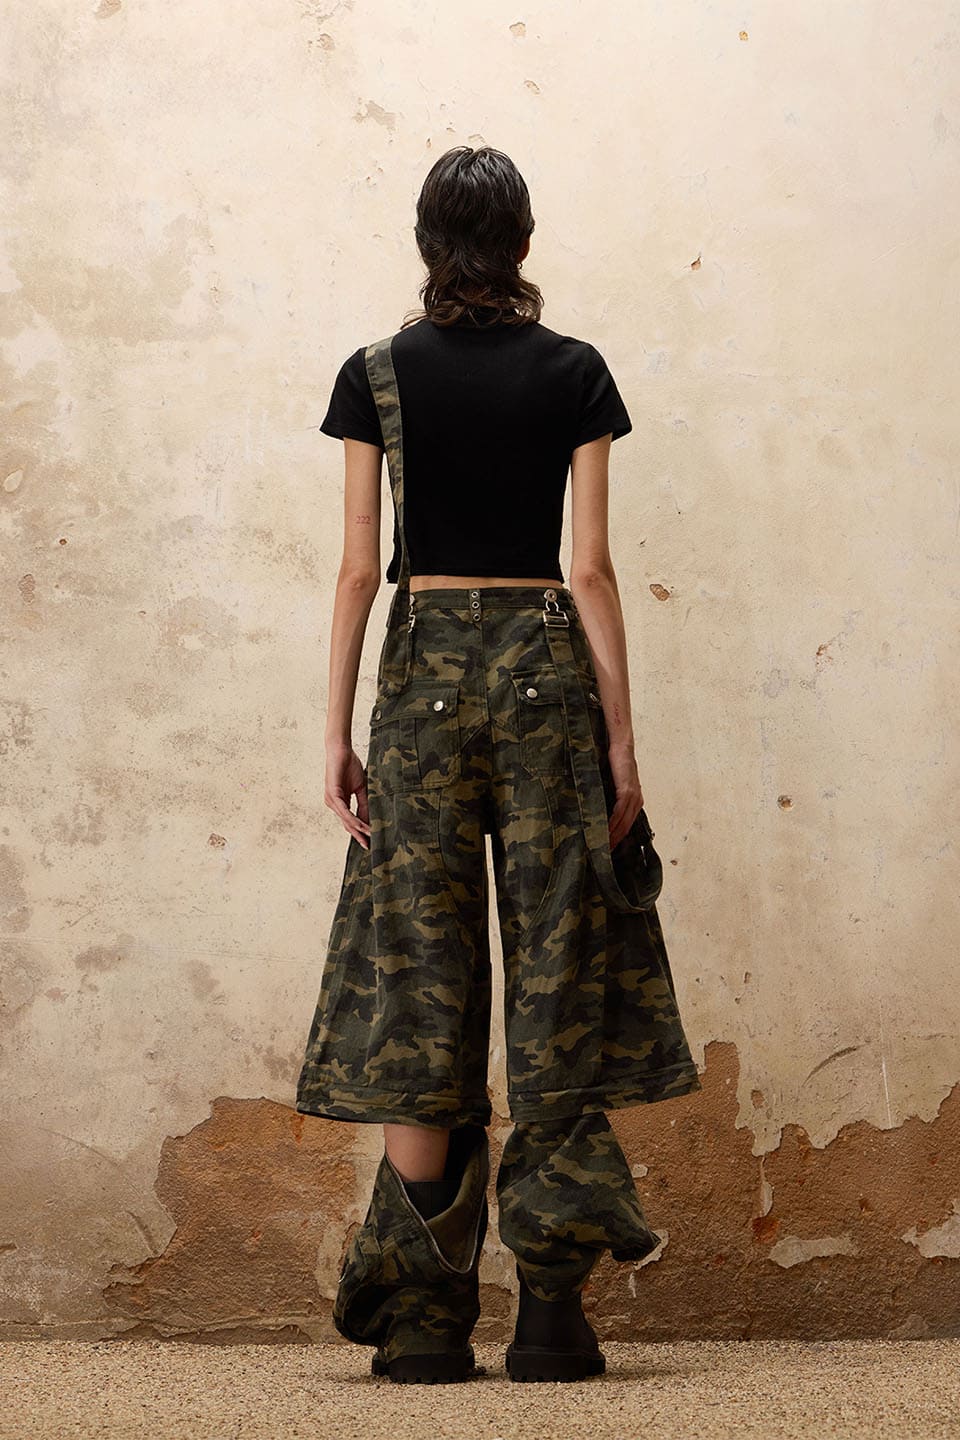 Camouflage Overalls With Zip-Off Legs